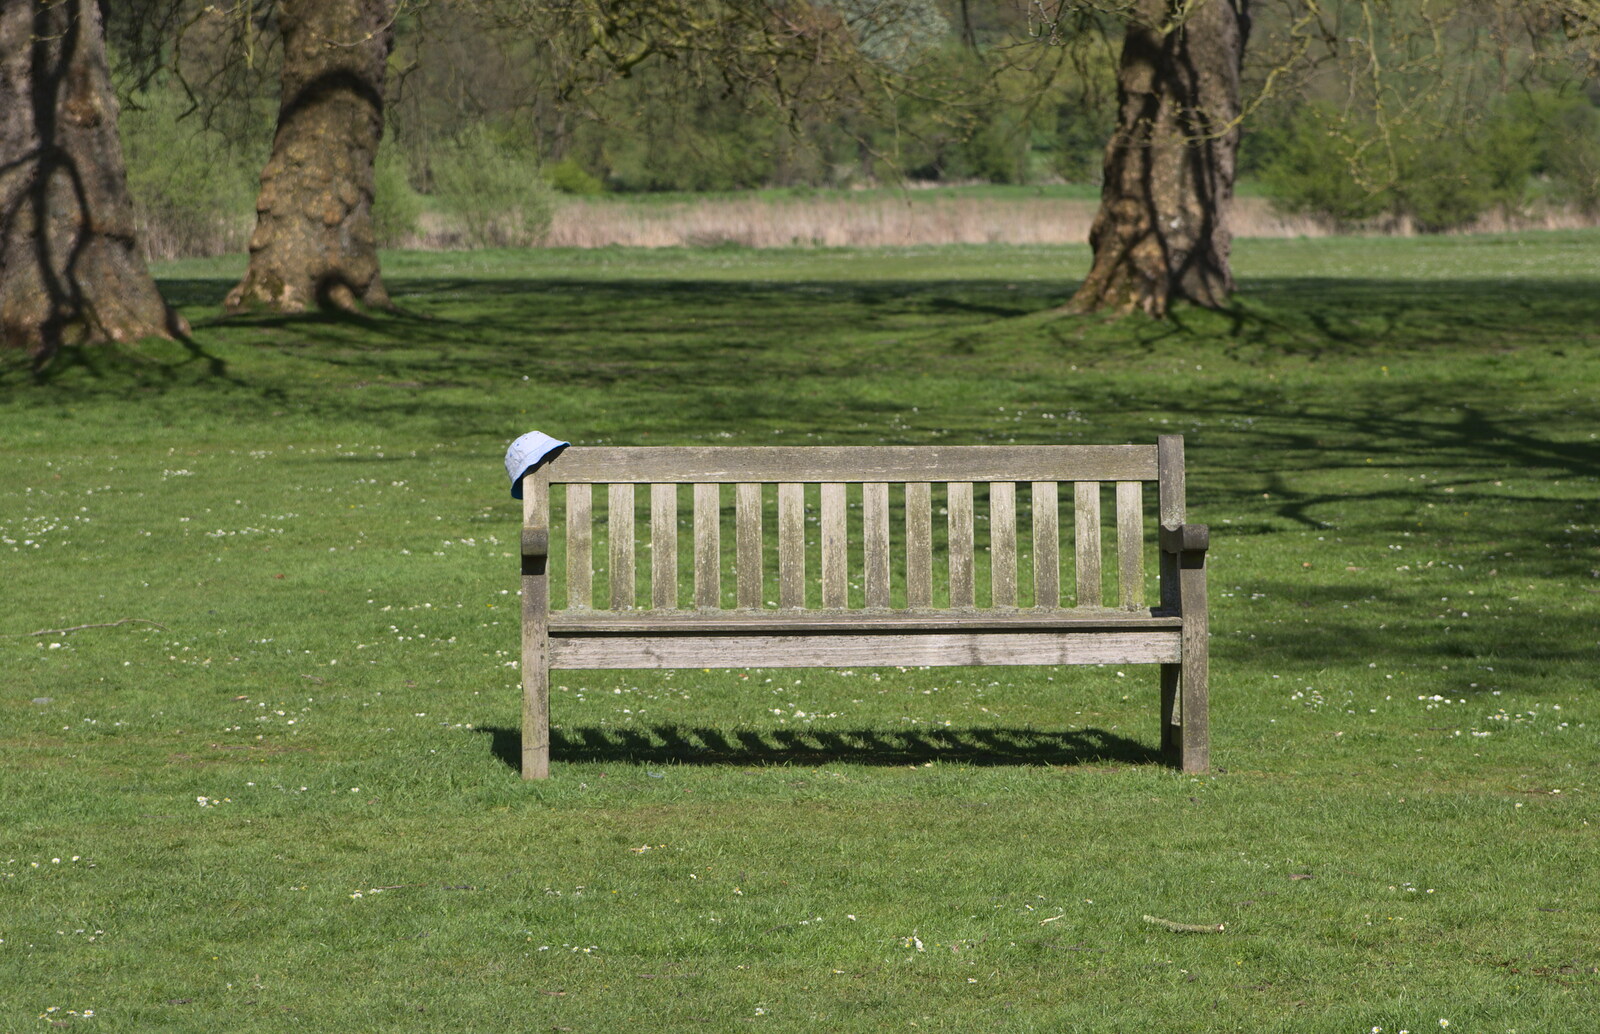 There's a lost hat perched on a bench from A Trip to Audley End House, Saffron Walden, Essex - 16th April 2014